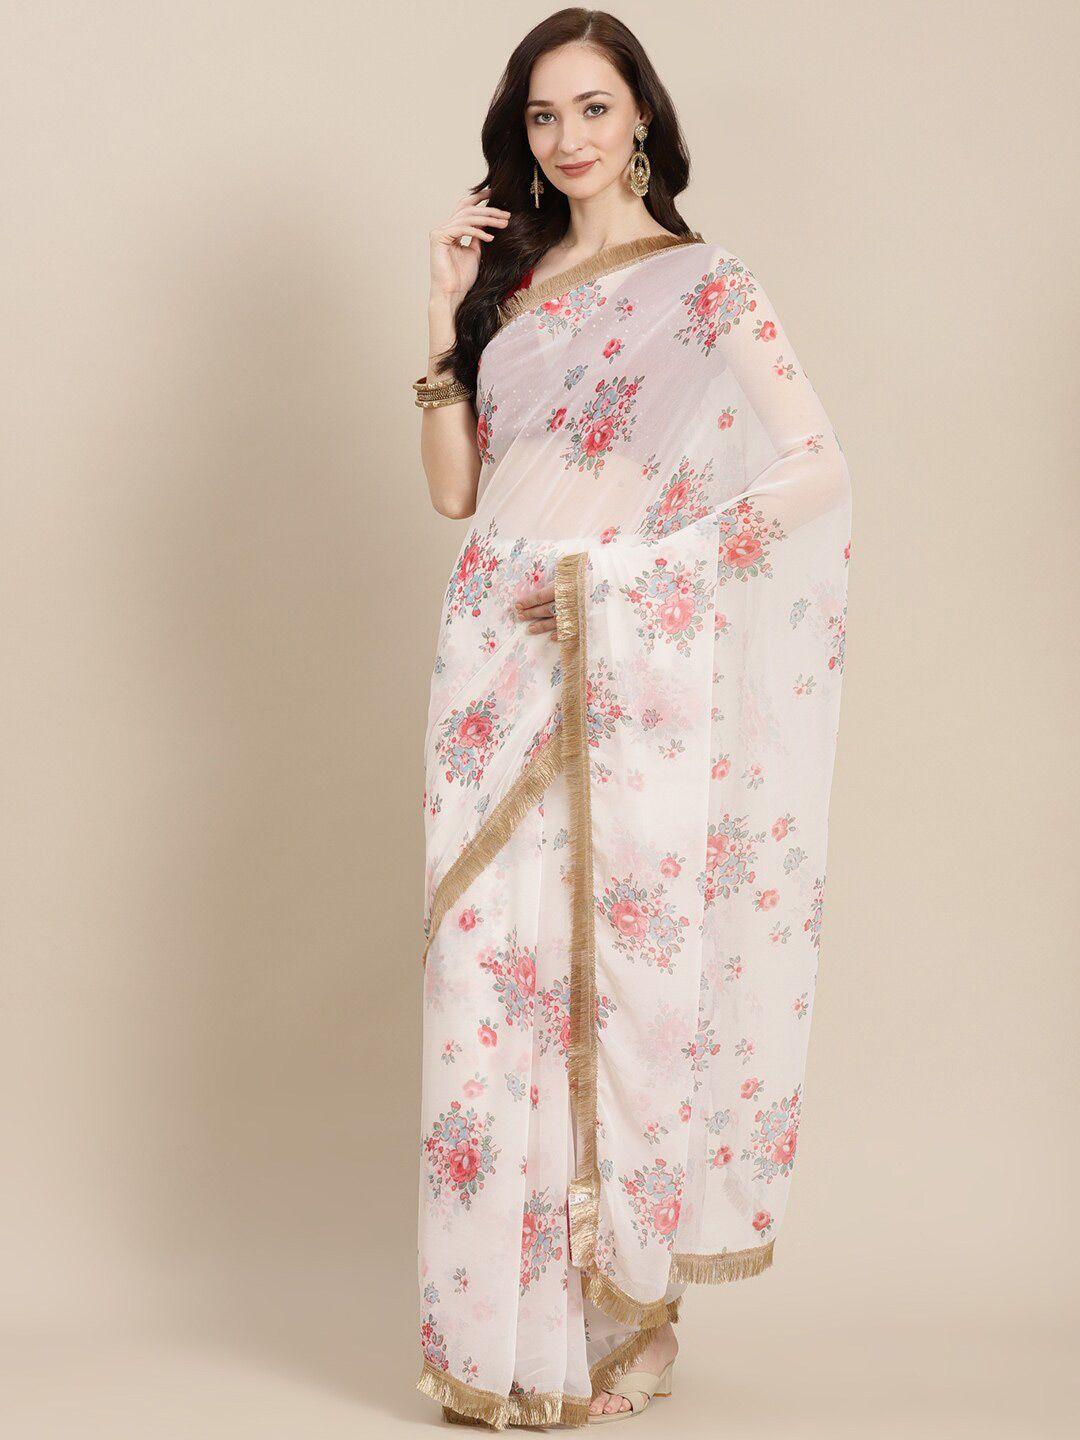 kalista off white & red floral pure georgette saree